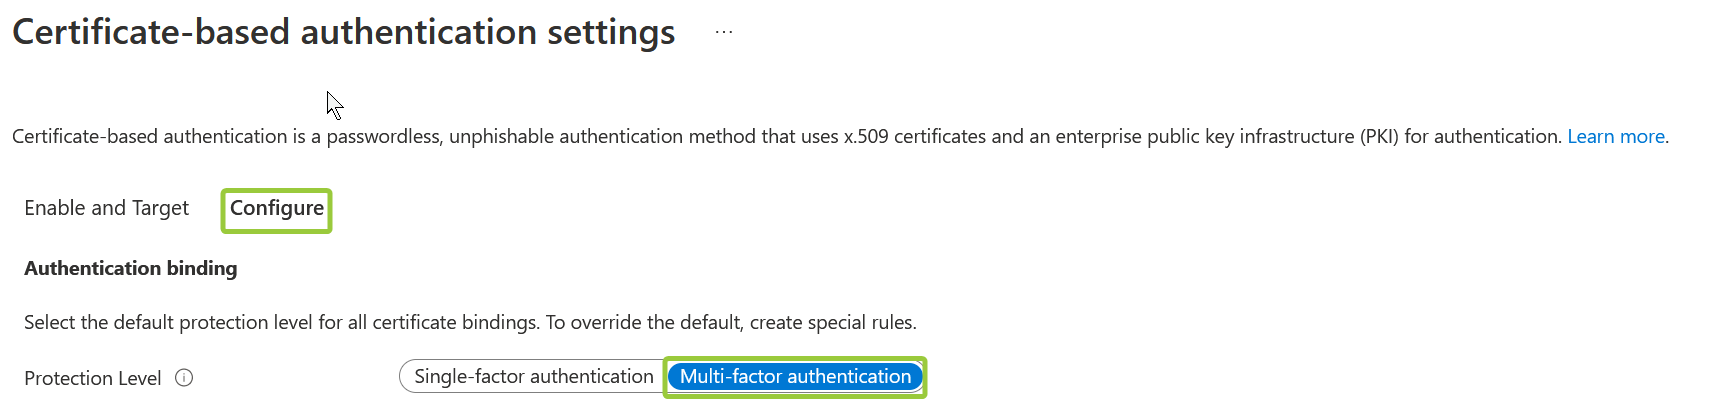 Enable_Azure_AD_Certificate_Based_Authentication_5.png